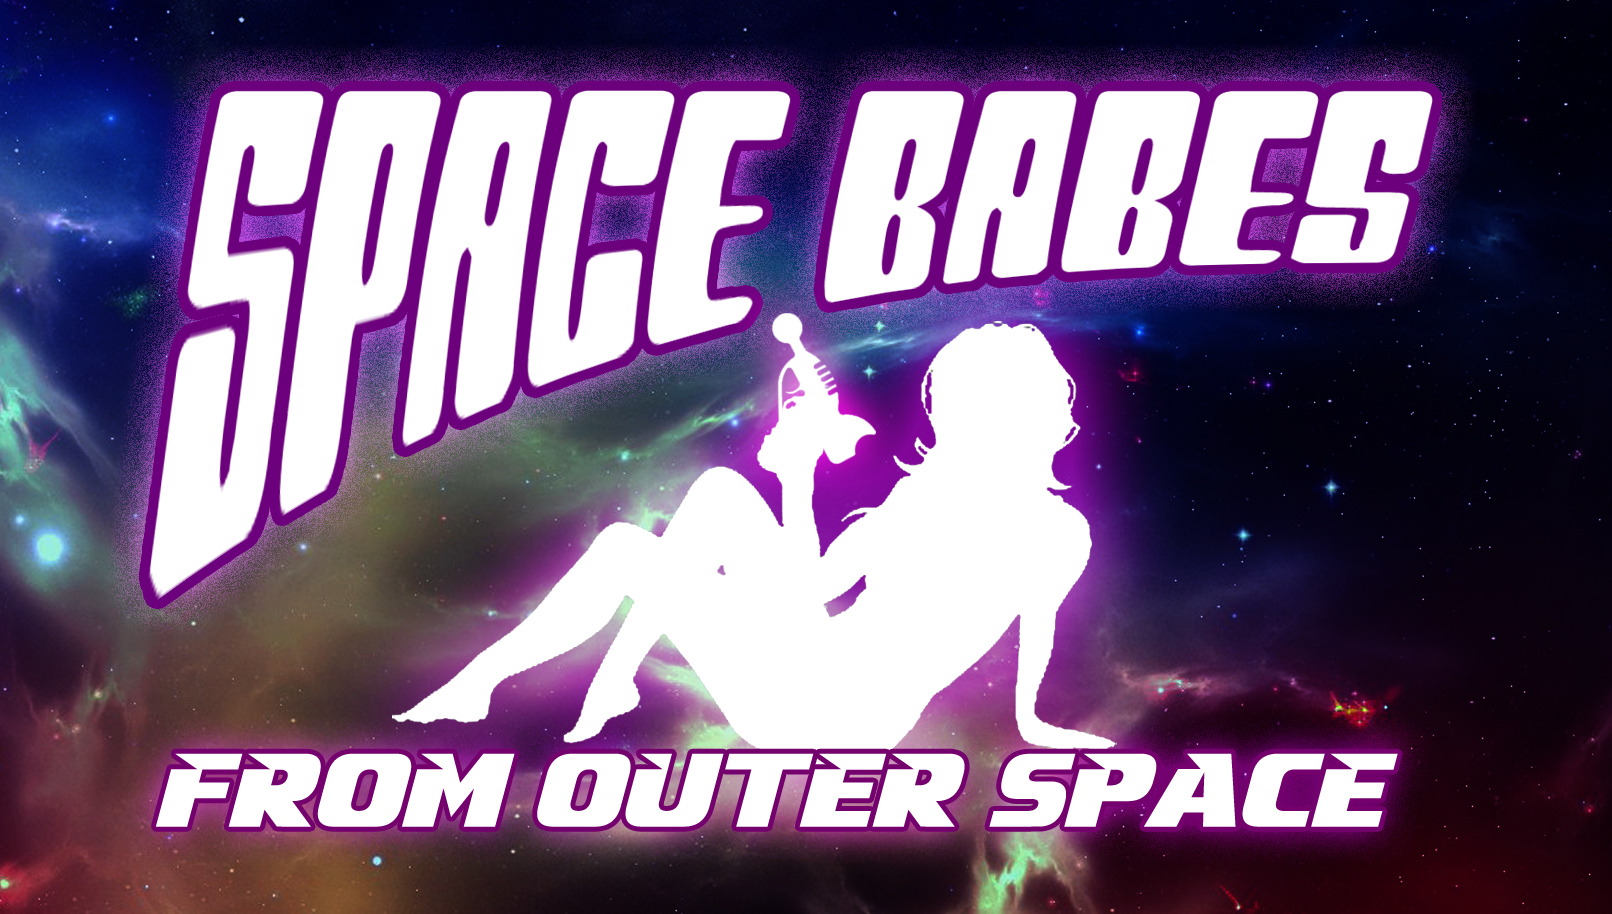 Space Boobs In Space Trailer